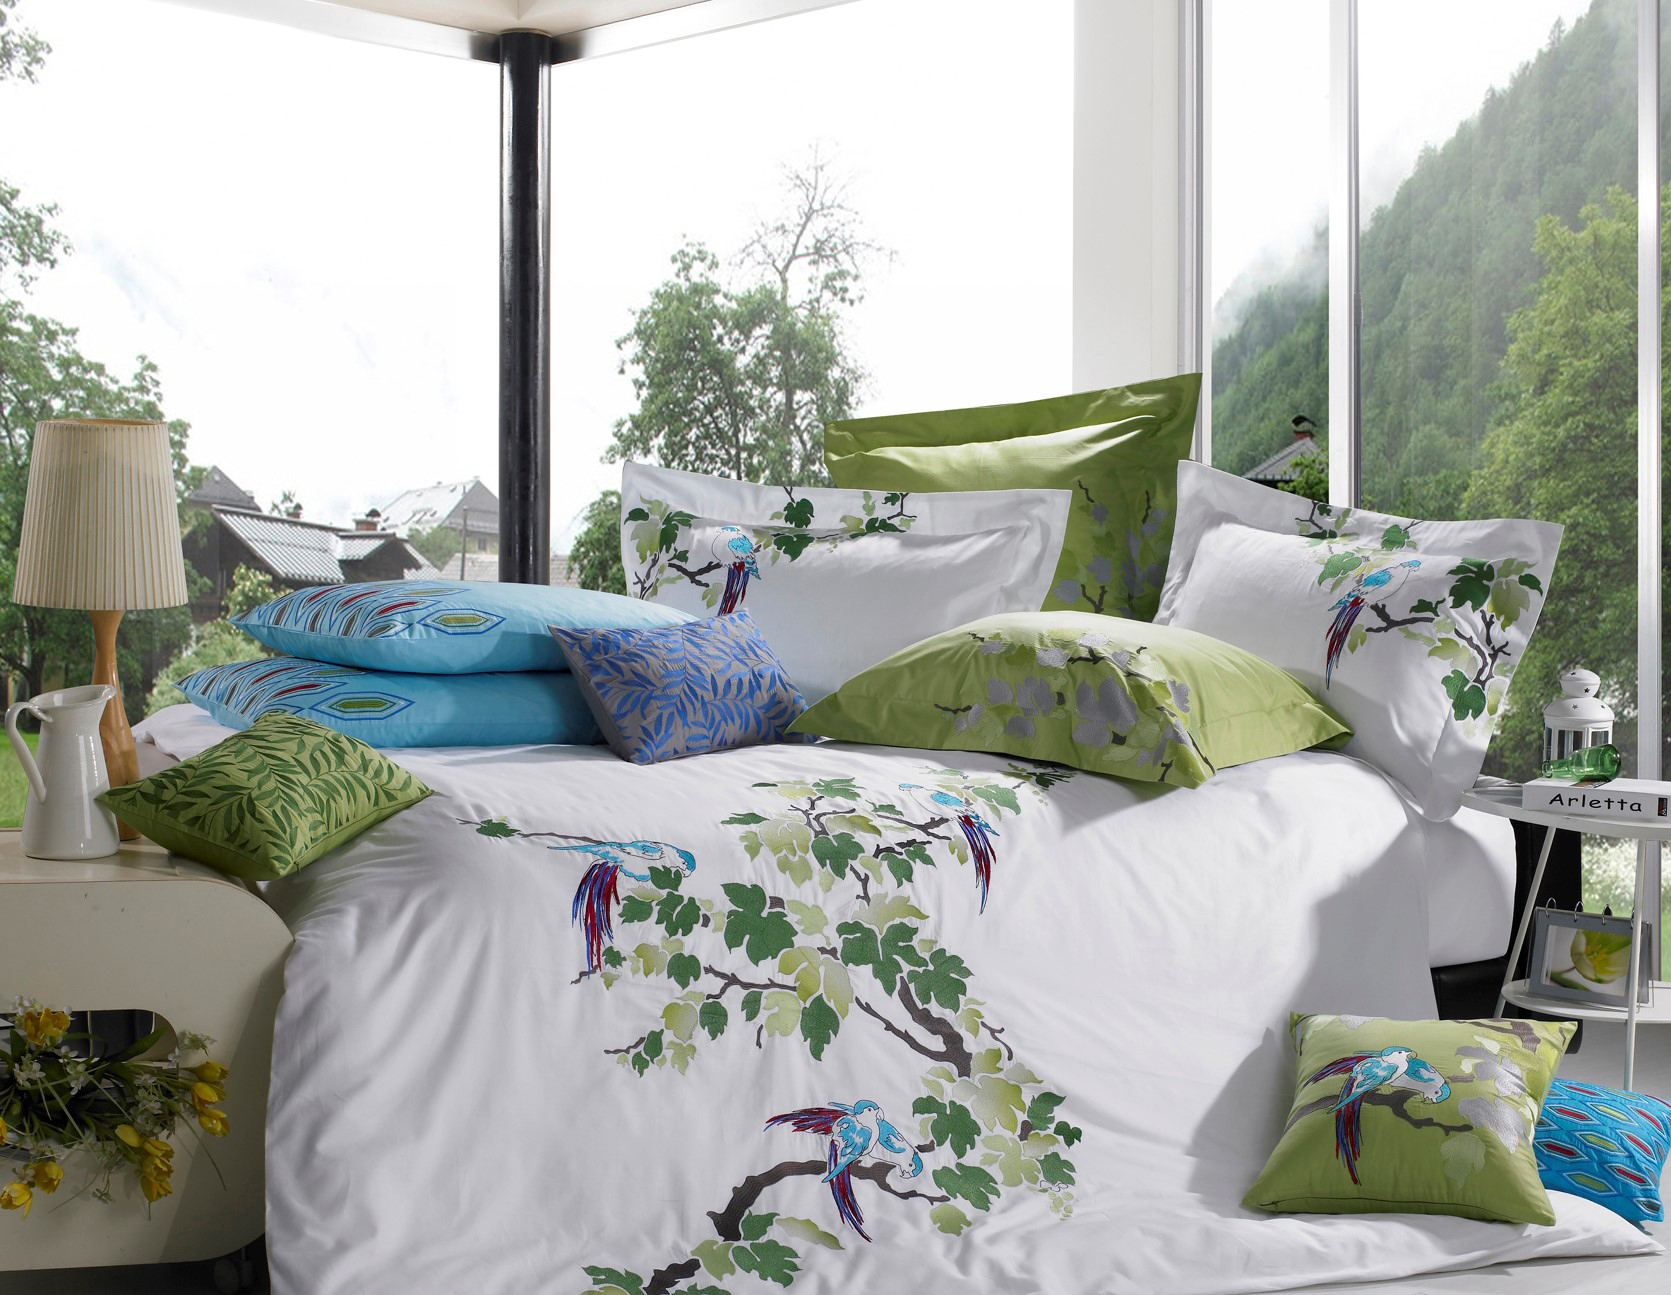 Maishaa Unveils the Thread Art Collection of Bed Linen